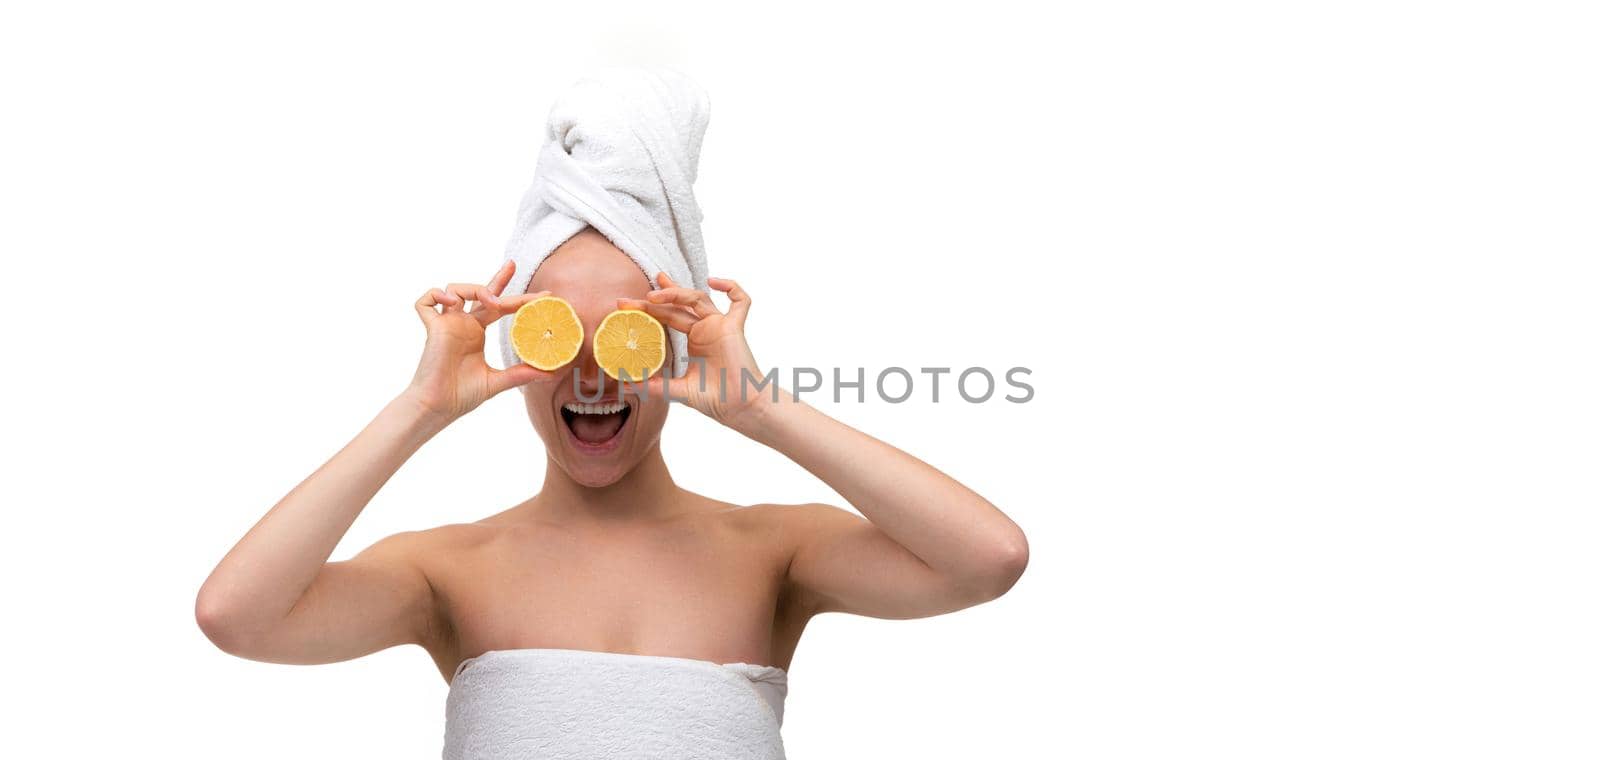 a cheerful middle-aged woman with well-groomed skin after a shower with a cut orange in her hands instead of eyes by TRMK